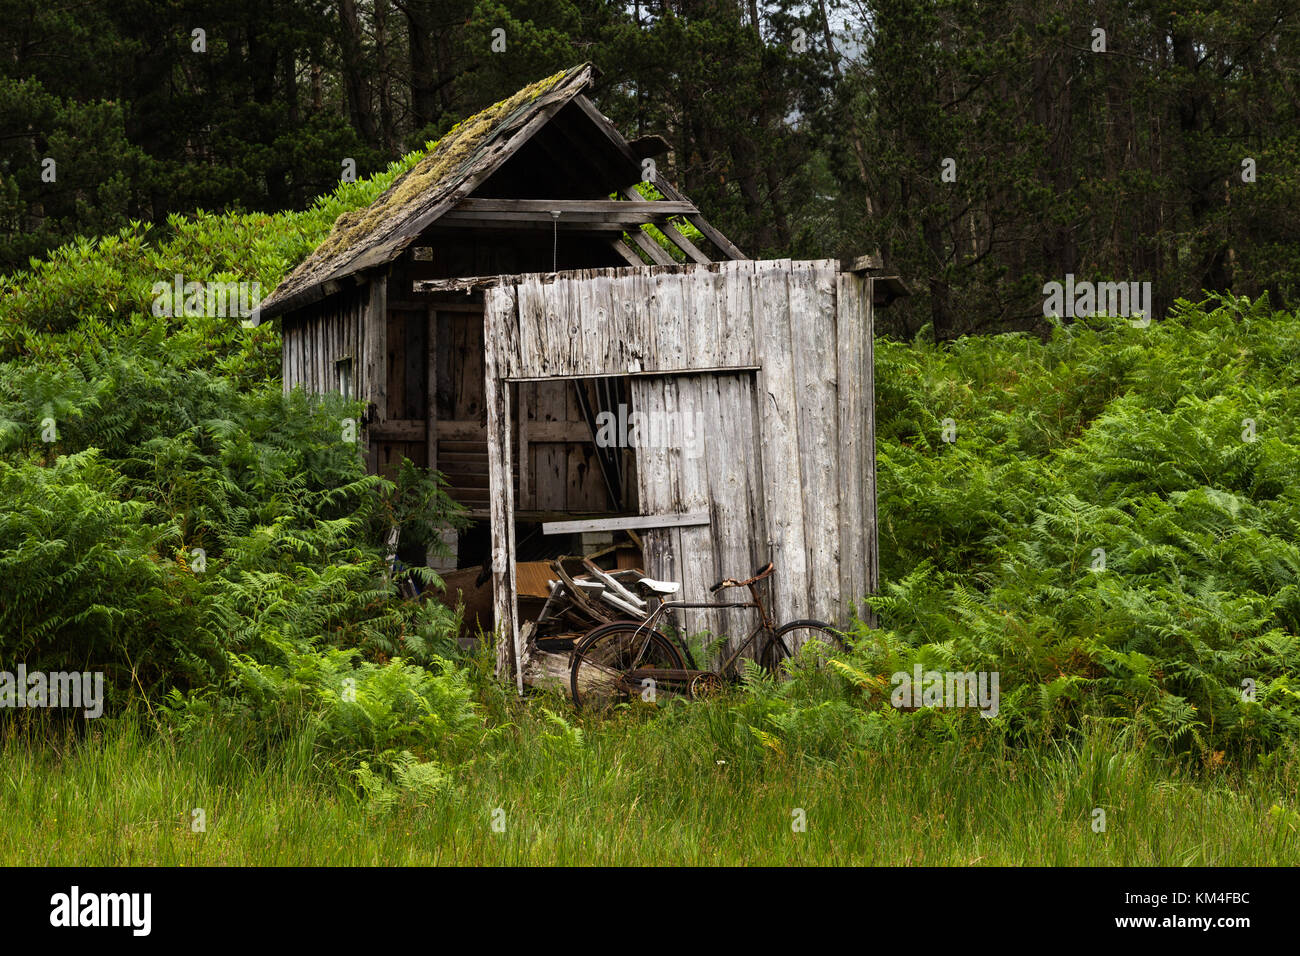 Tumbledown shed with old bycycle on the edge of a forest in Glen Etive, Highlands of Scotland Stock Photo